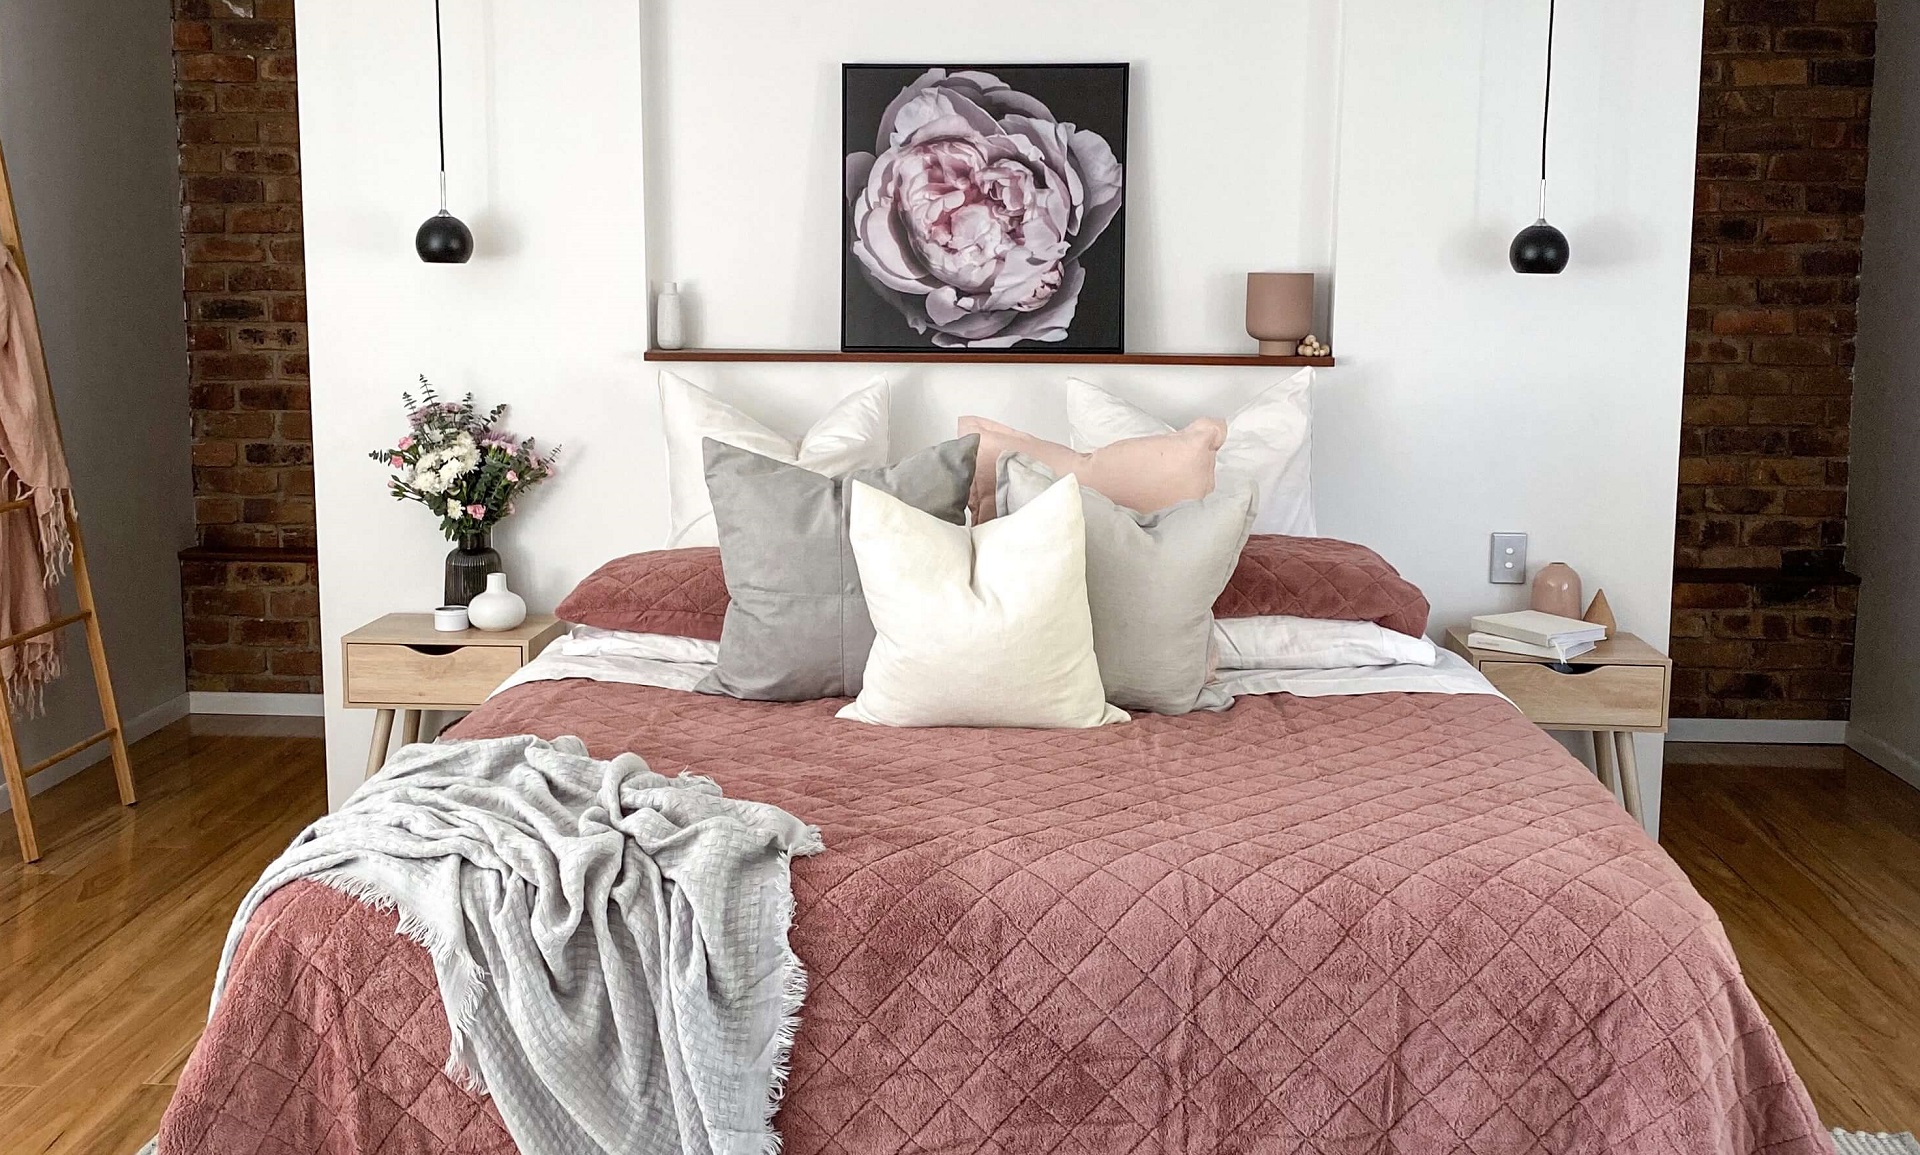 How to make your bedroom cosy during a change in season